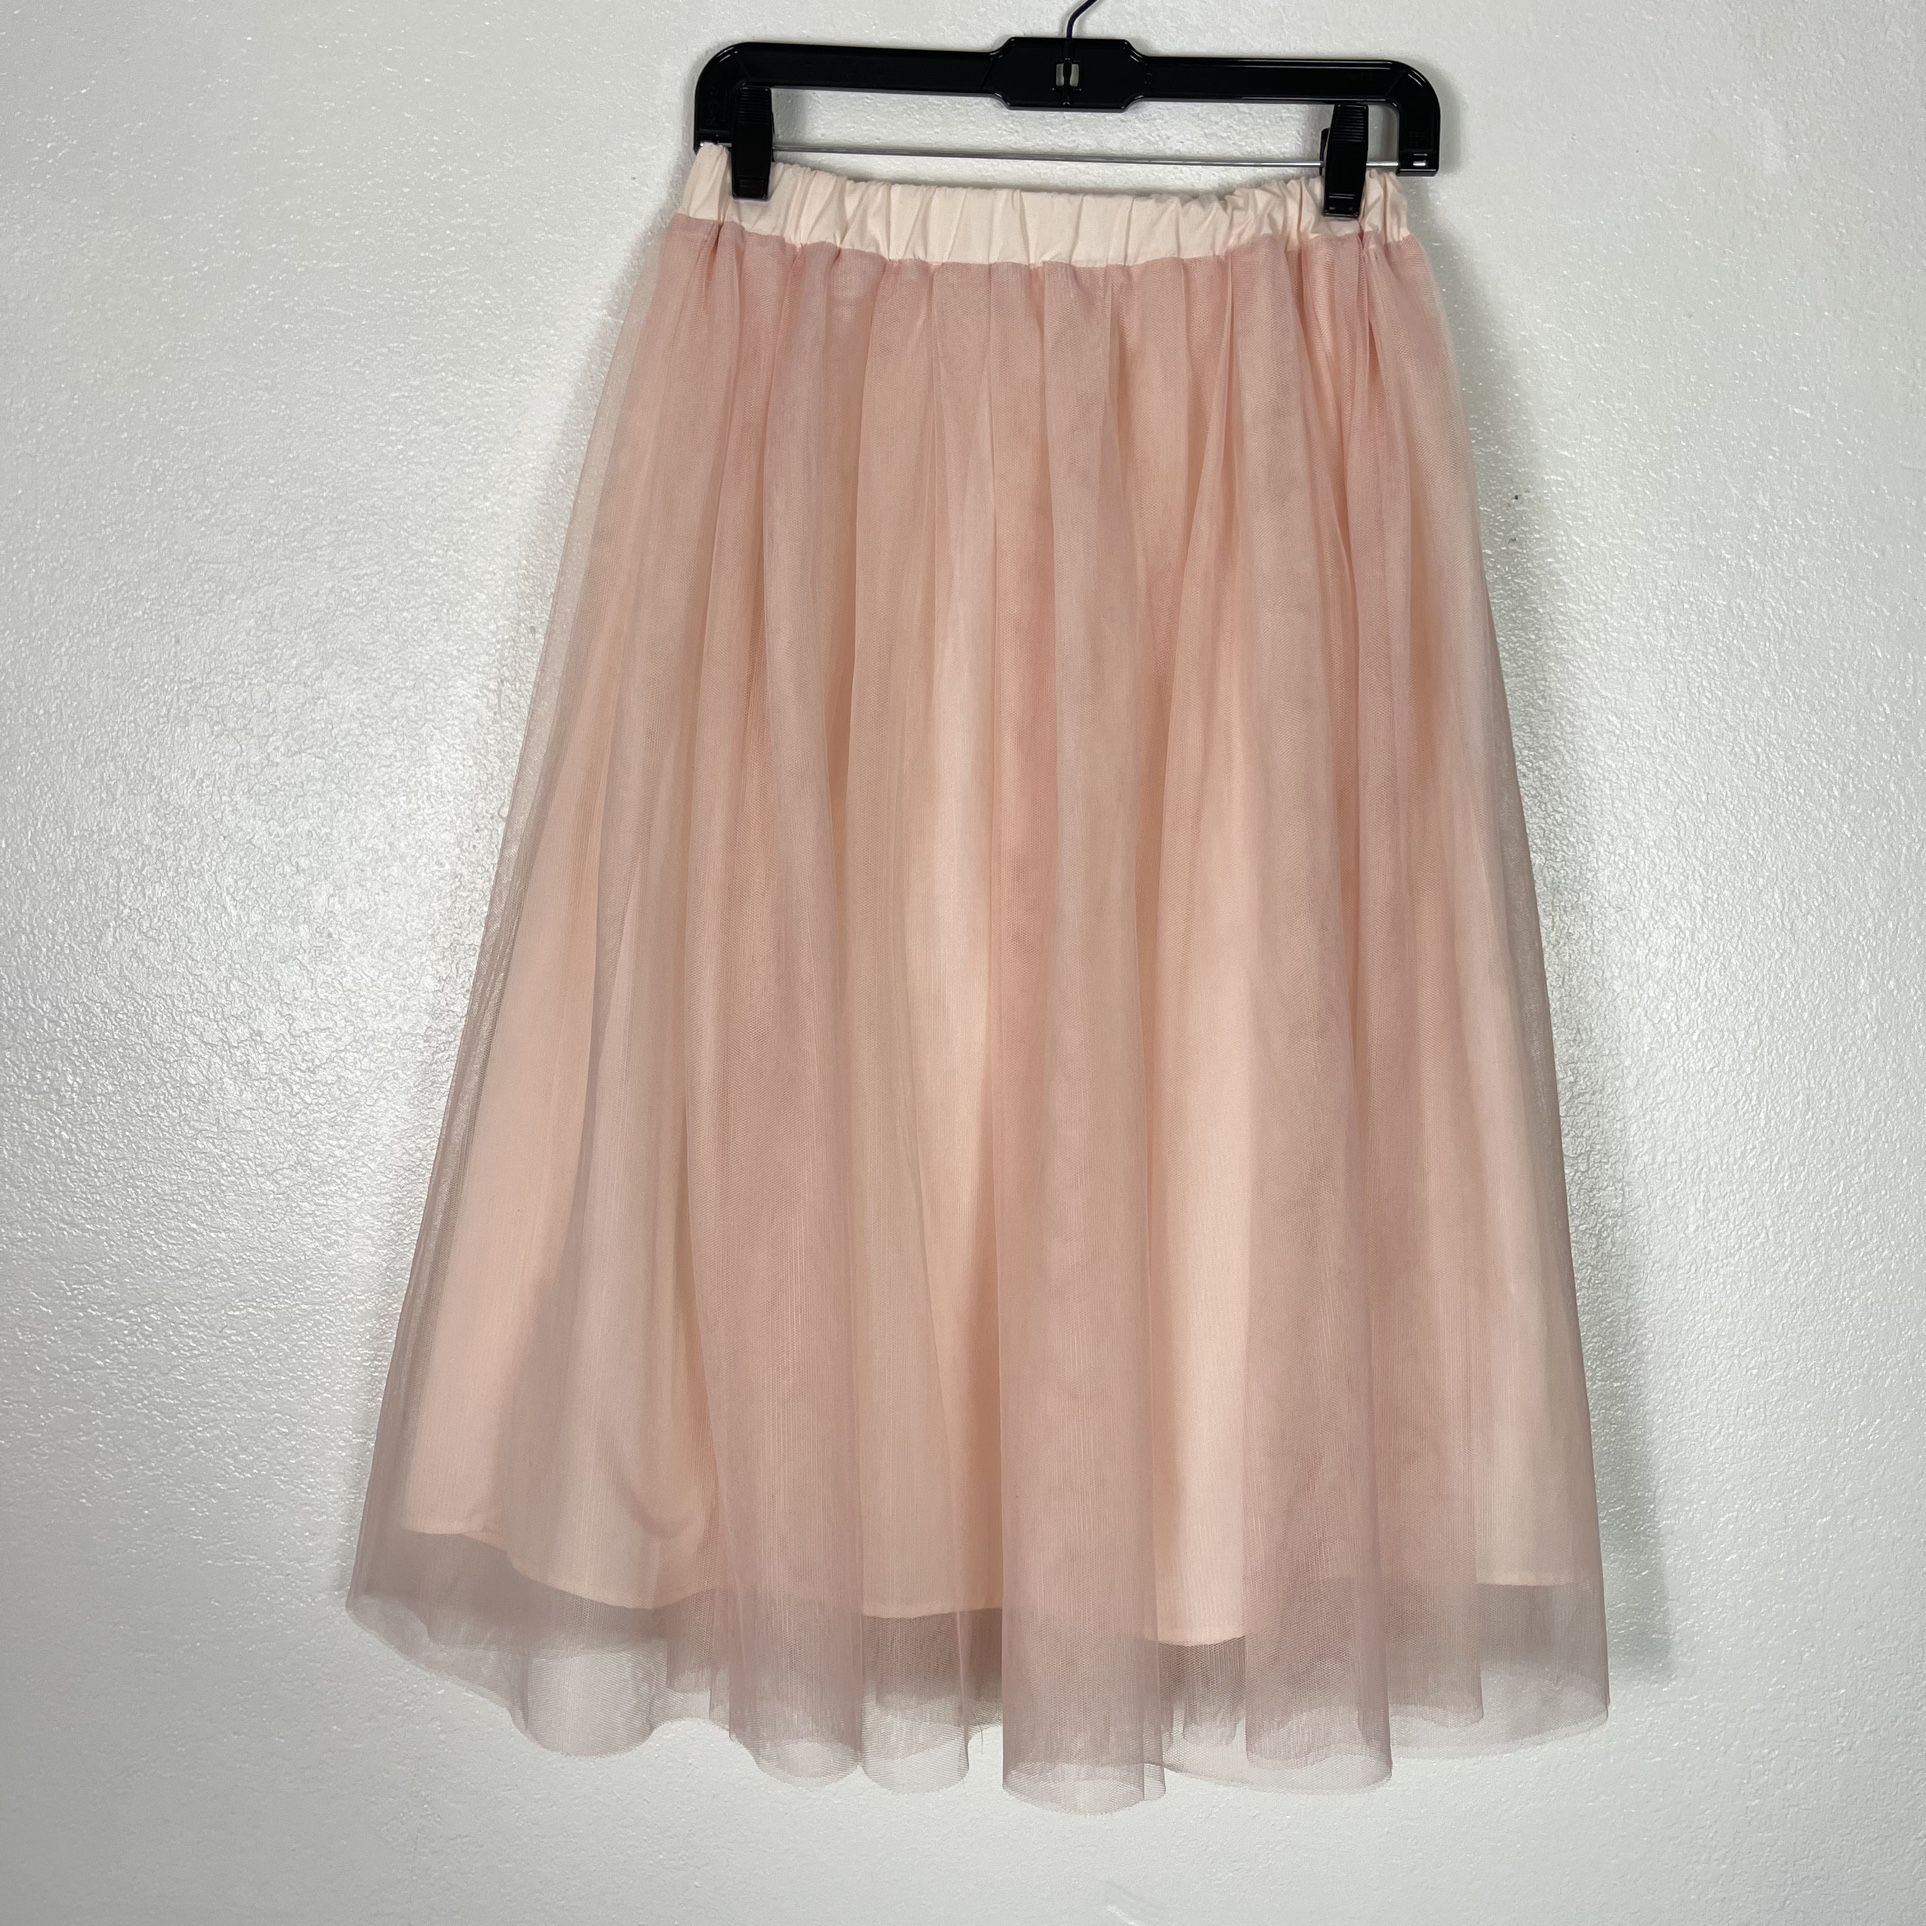 Persun Pink tulle midi skirt size small 